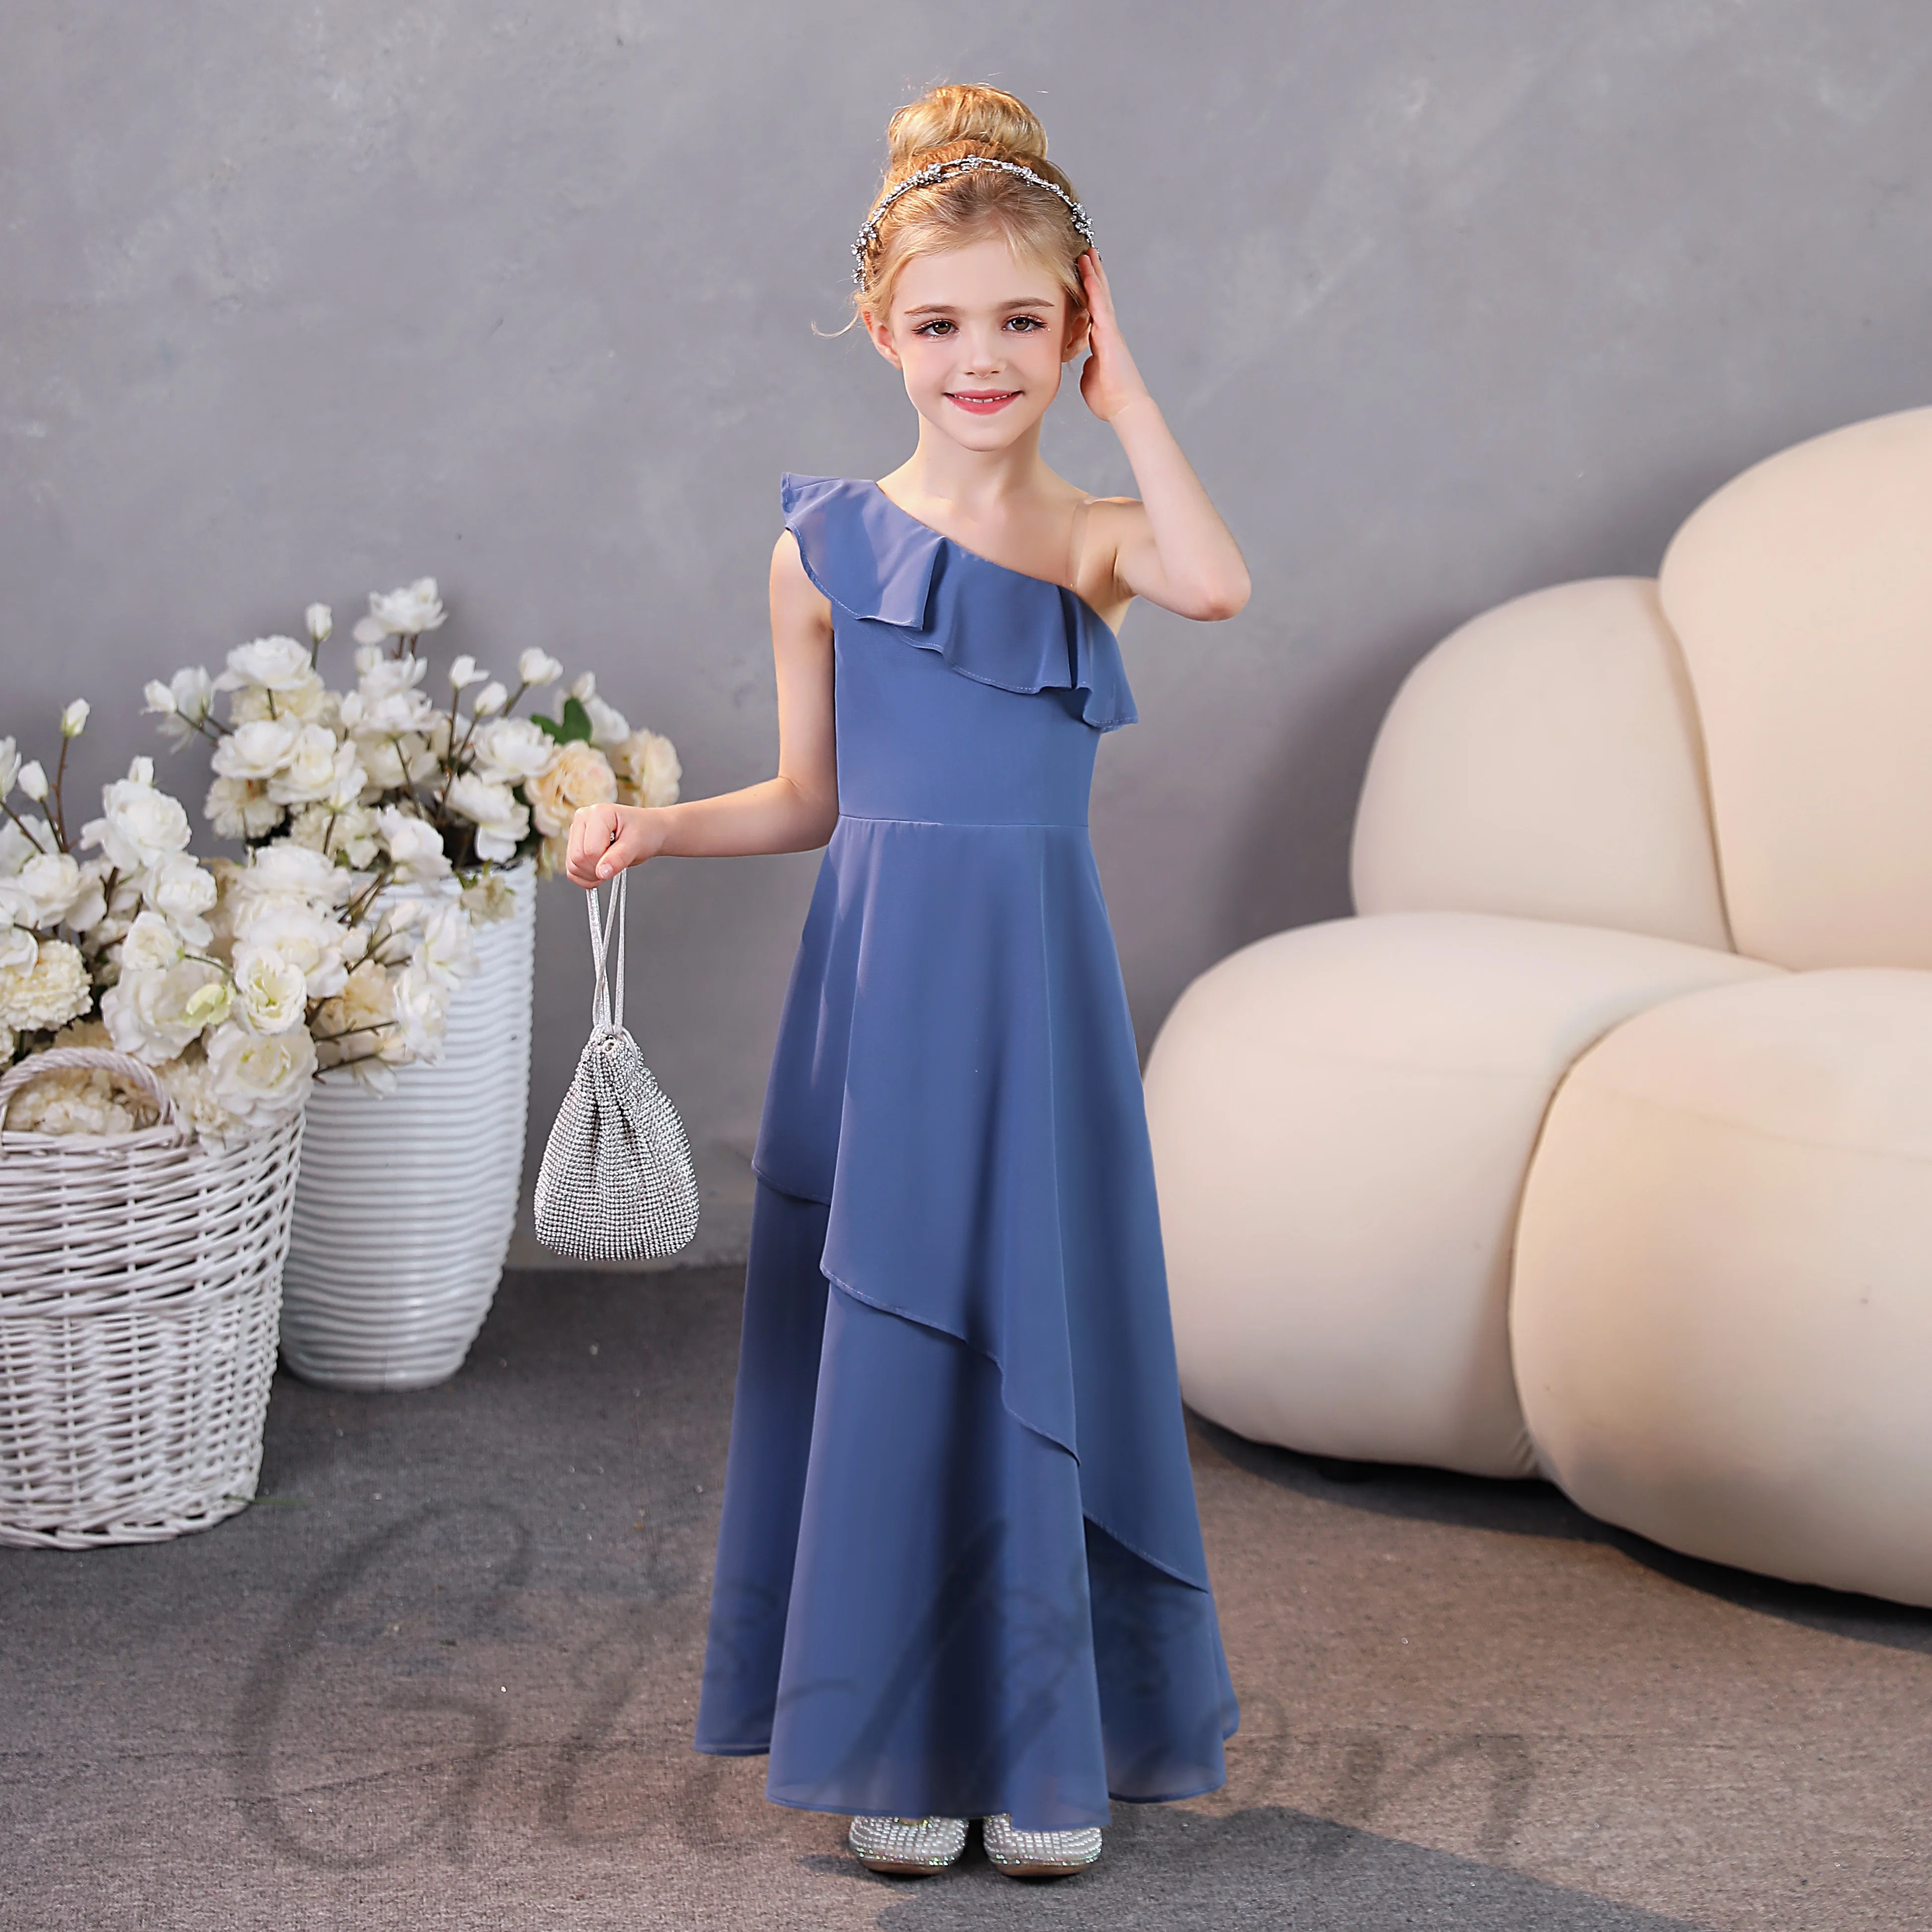 

One-Shoulder Chiffon Junior Bridesmaid Dress For Kids Wedding Prom Night Banquet Pageant Show Ball Evening-Gown Any Event Party